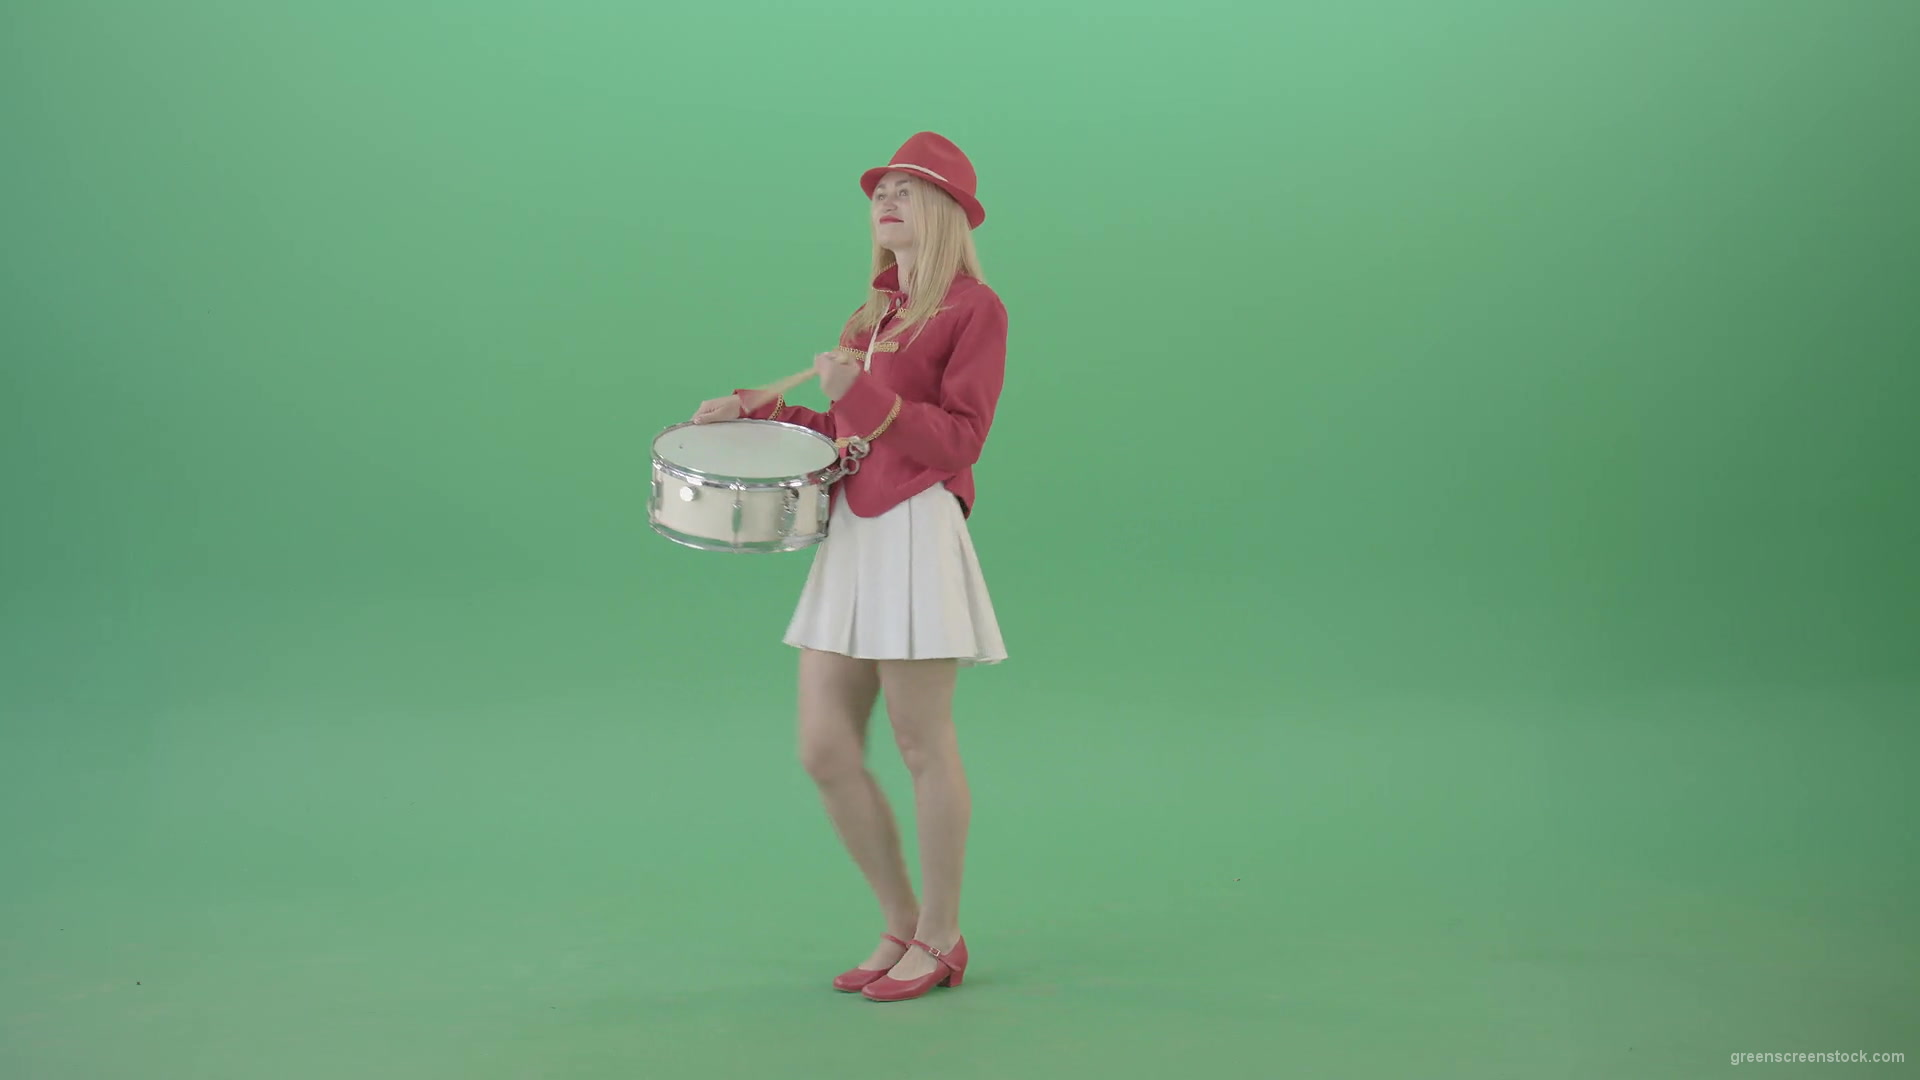 Red-Costume-Girl-in-Side-view-marching-on-green-screen-and-playing-snare-drum-4K-Video-Footage-1920_007 Green Screen Stock